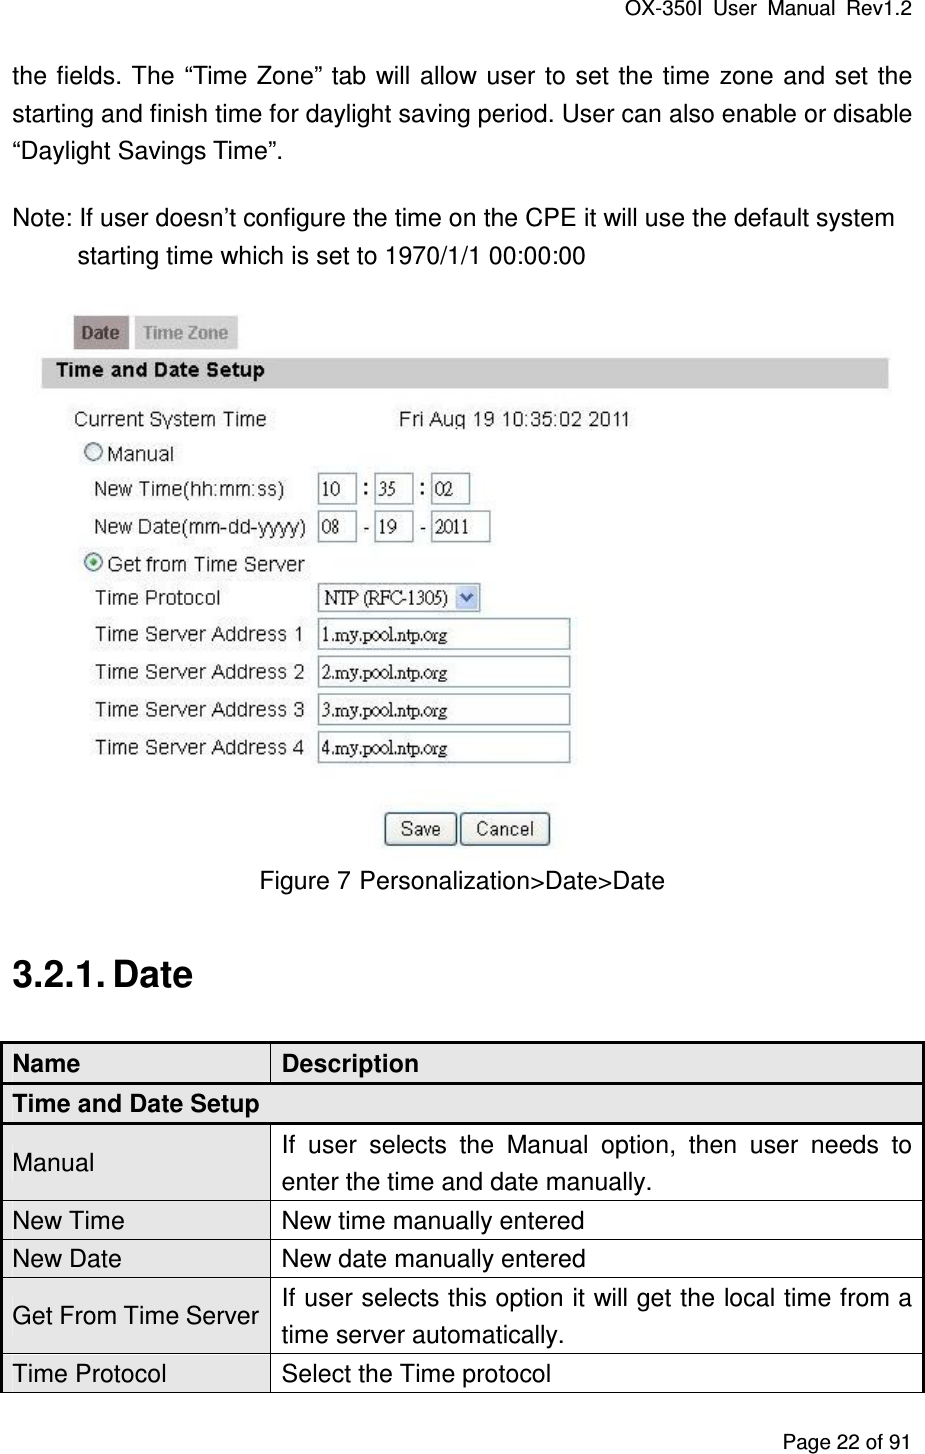 OX-350I  User  Manual  Rev1.2 Page 22 of 91 the fields. The “Time Zone” tab  will allow user  to set the time zone and  set the starting and finish time for daylight saving period. User can also enable or disable “Daylight Savings Time”. Note: If user doesn’t configure the time on the CPE it will use the default system starting time which is set to 1970/1/1 00:00:00  Figure 7 Personalization&gt;Date&gt;Date 3.2.1. Date Name  Description Time and Date Setup Manual  If  user  selects  the  Manual  option,  then  user  needs  to enter the time and date manually. New Time  New time manually entered New Date  New date manually entered Get From Time Server If user selects this option it will get the local time from a time server automatically. Time Protocol  Select the Time protocol 